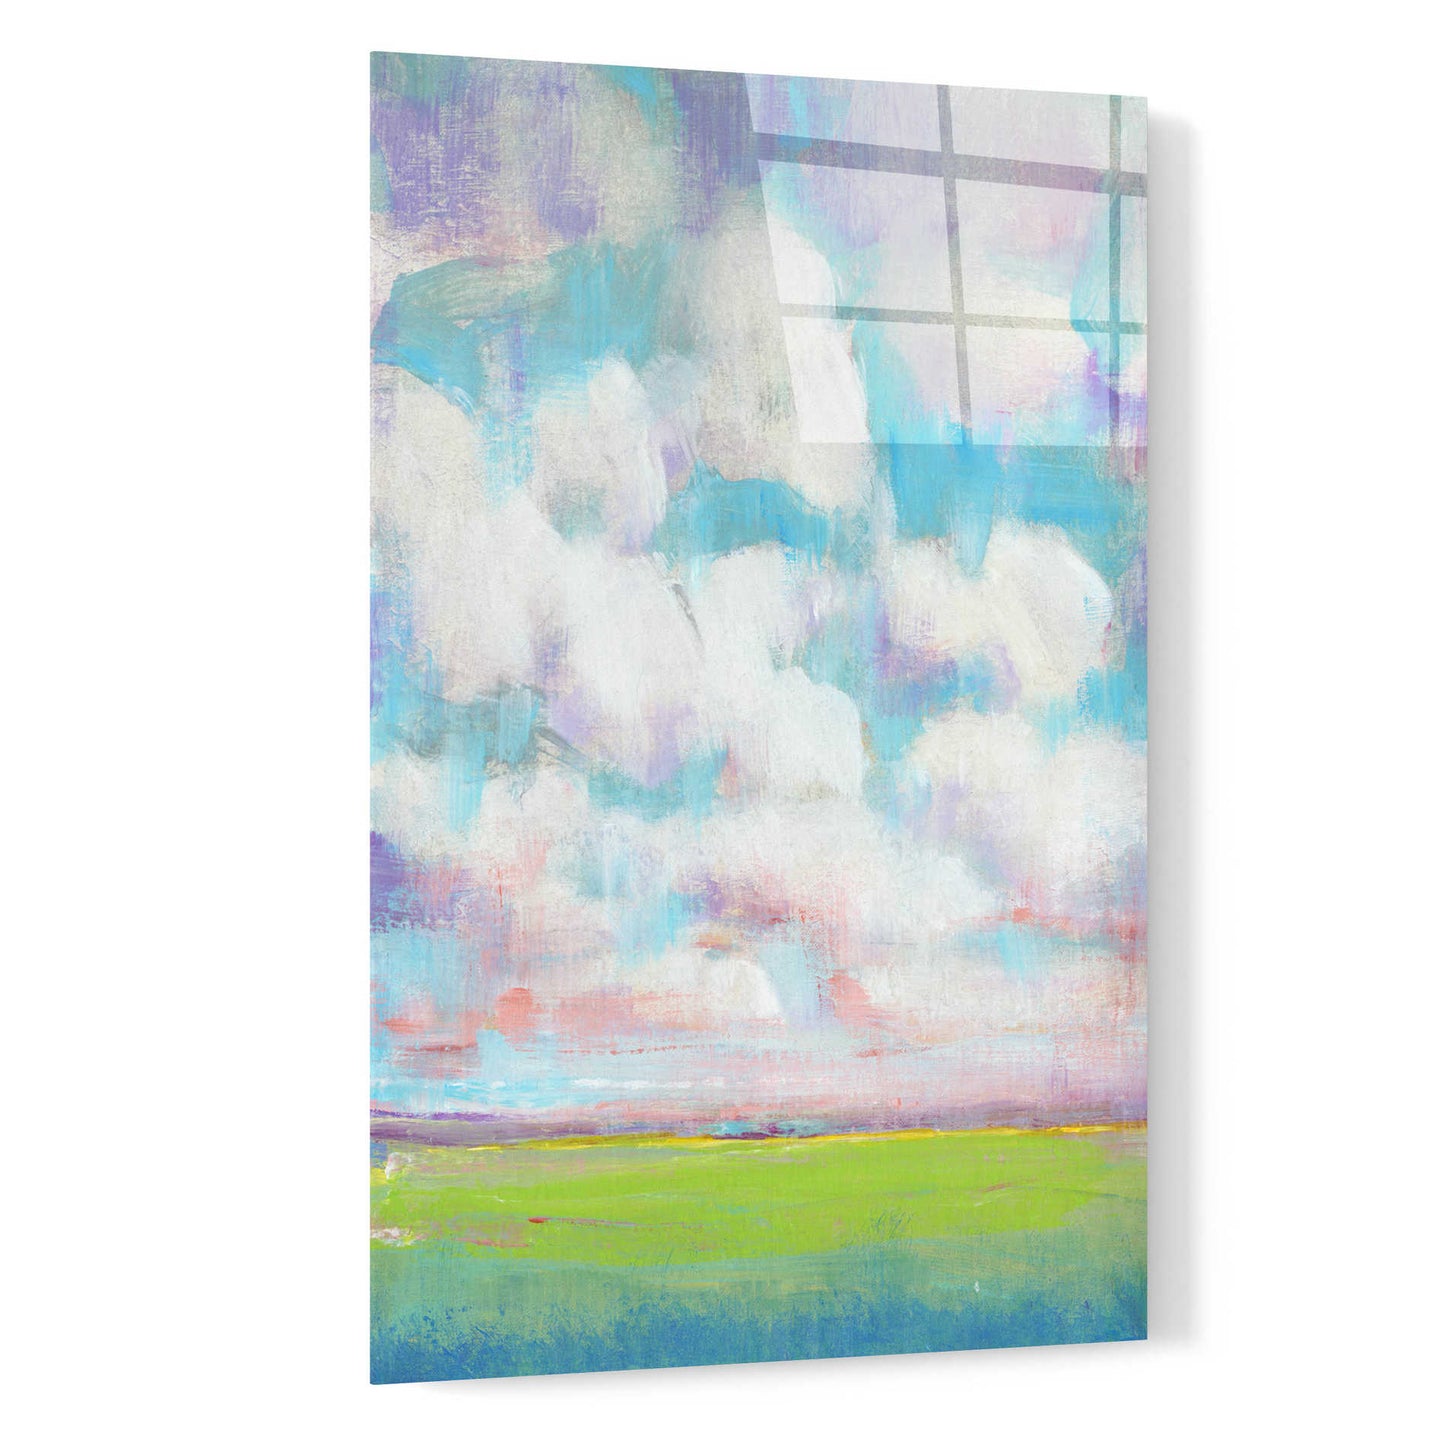 Epic Art 'Clouds in Motion II' by Tim O'Toole, Acrylic Glass Wall Art,16x24